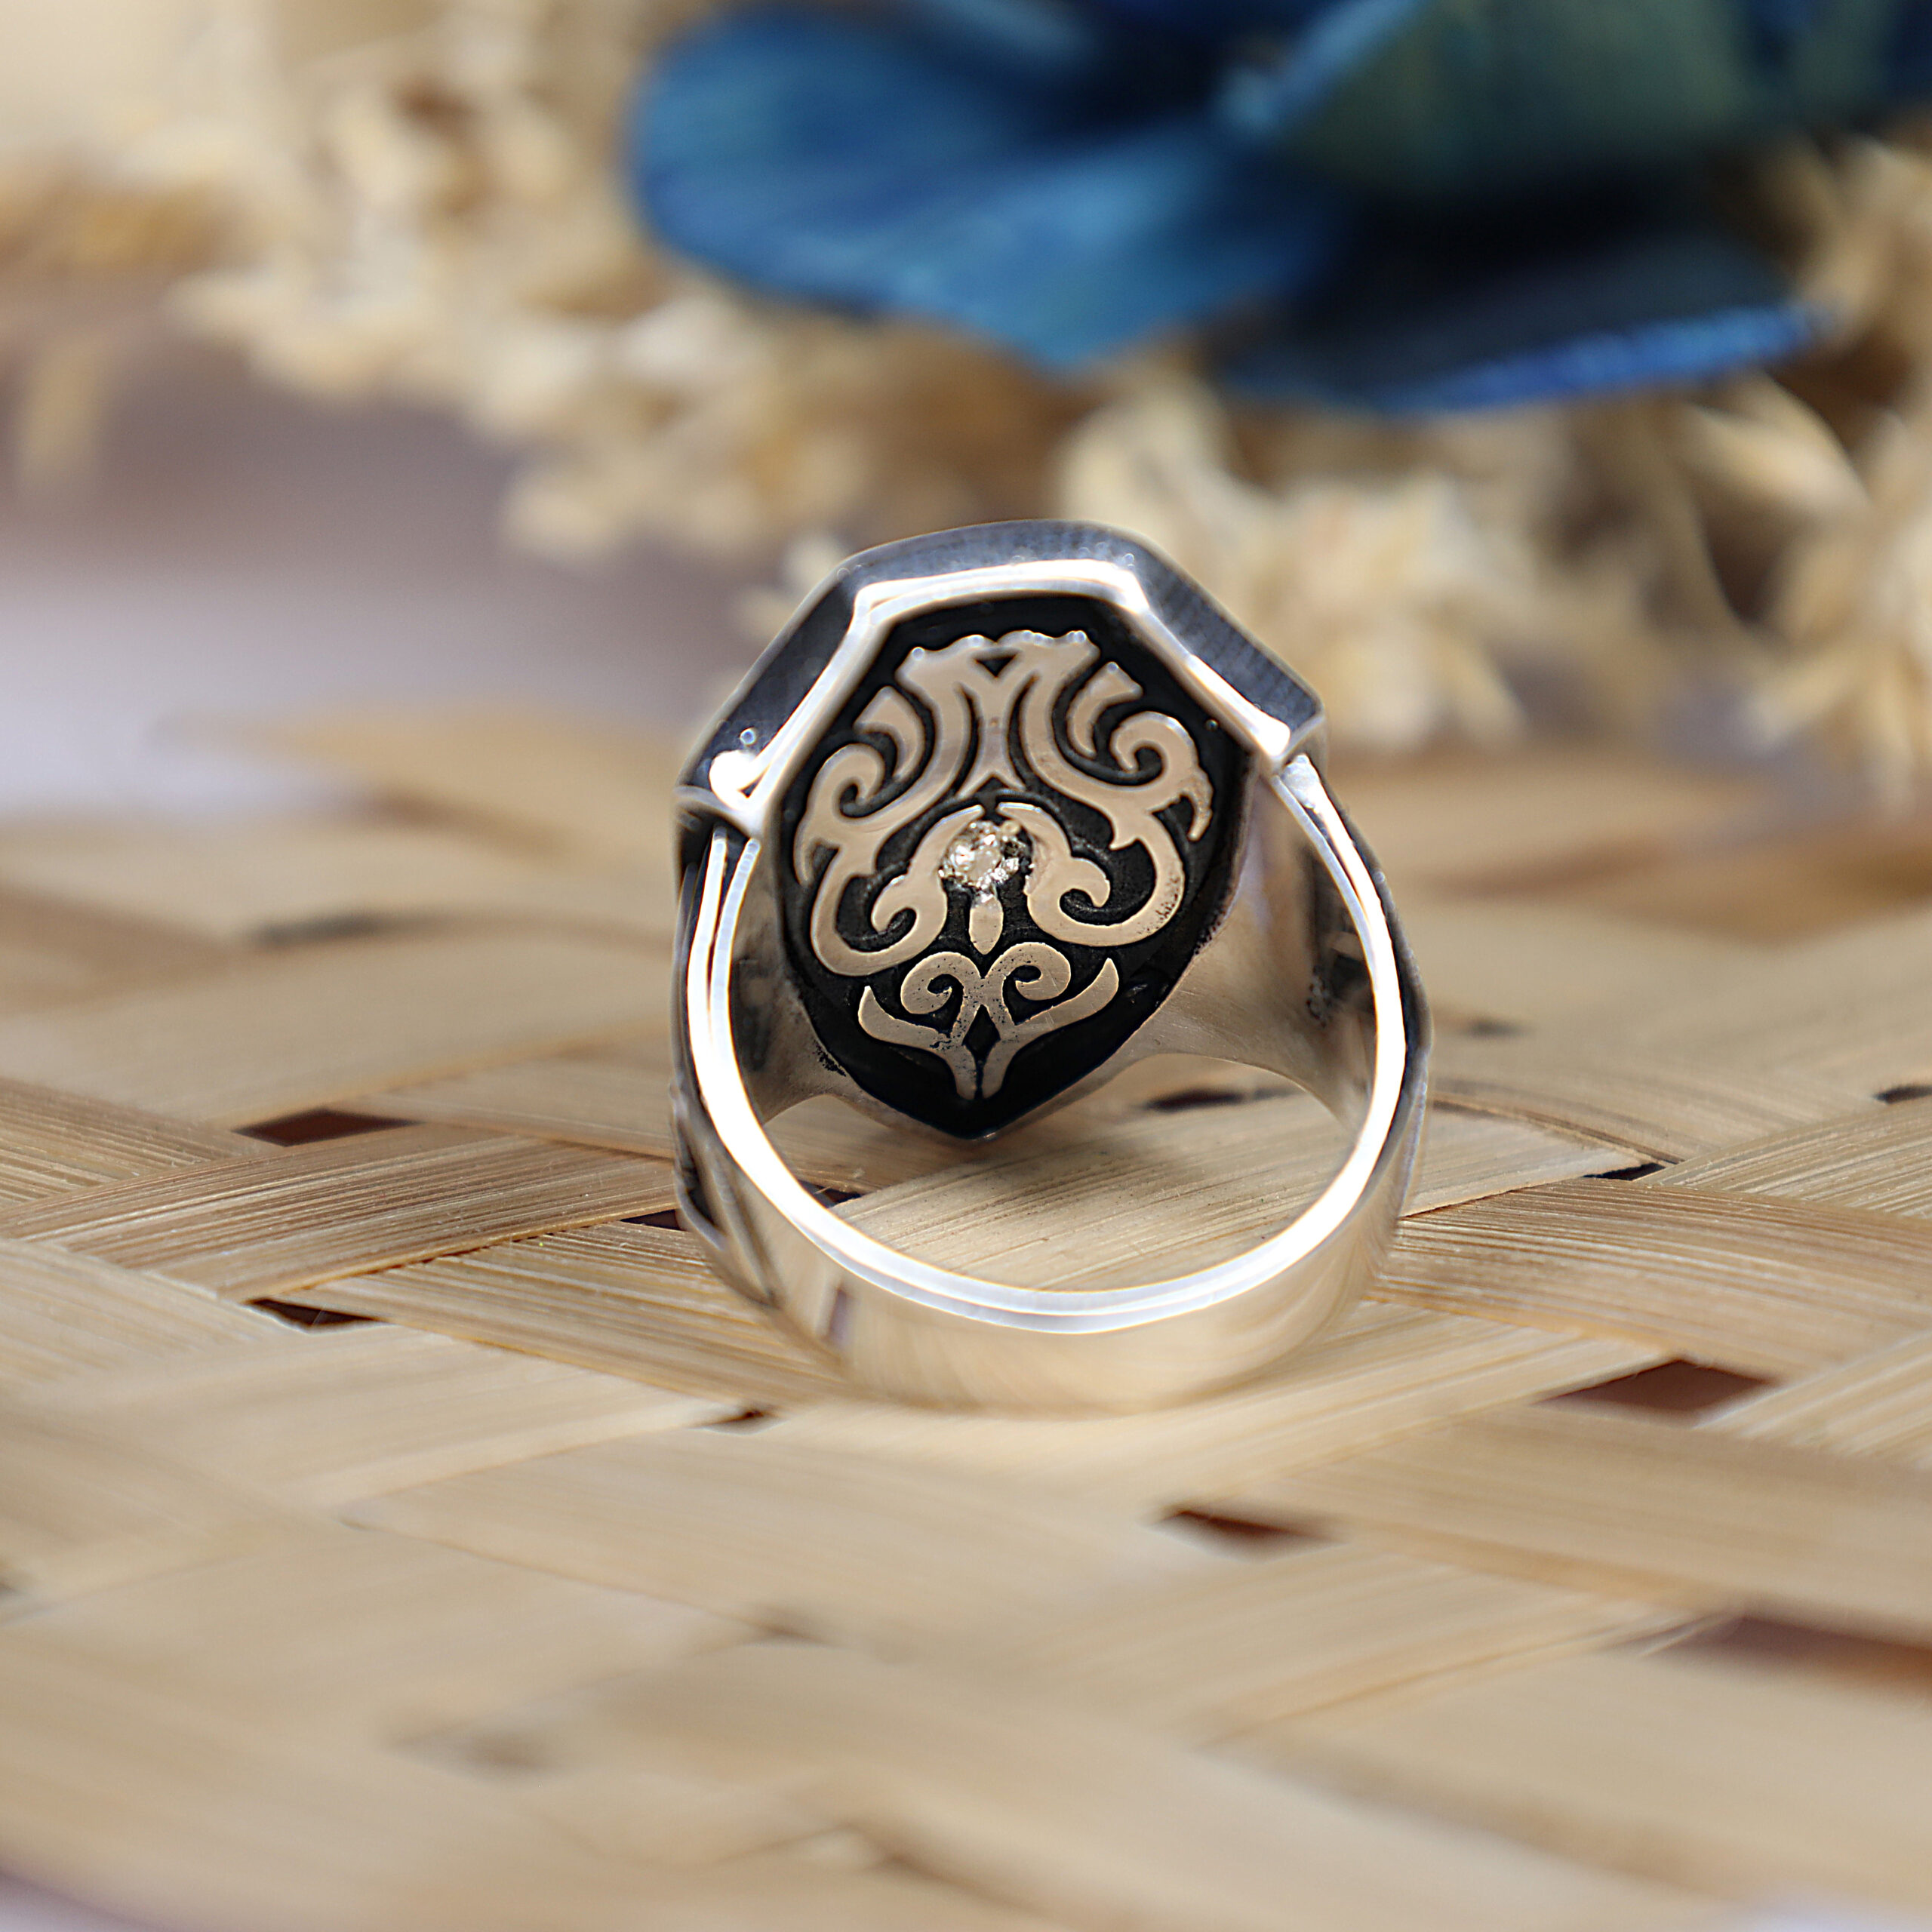 Lapis Lion Ring - Shield Shape - Scottish Lions - Gold Plated Silver